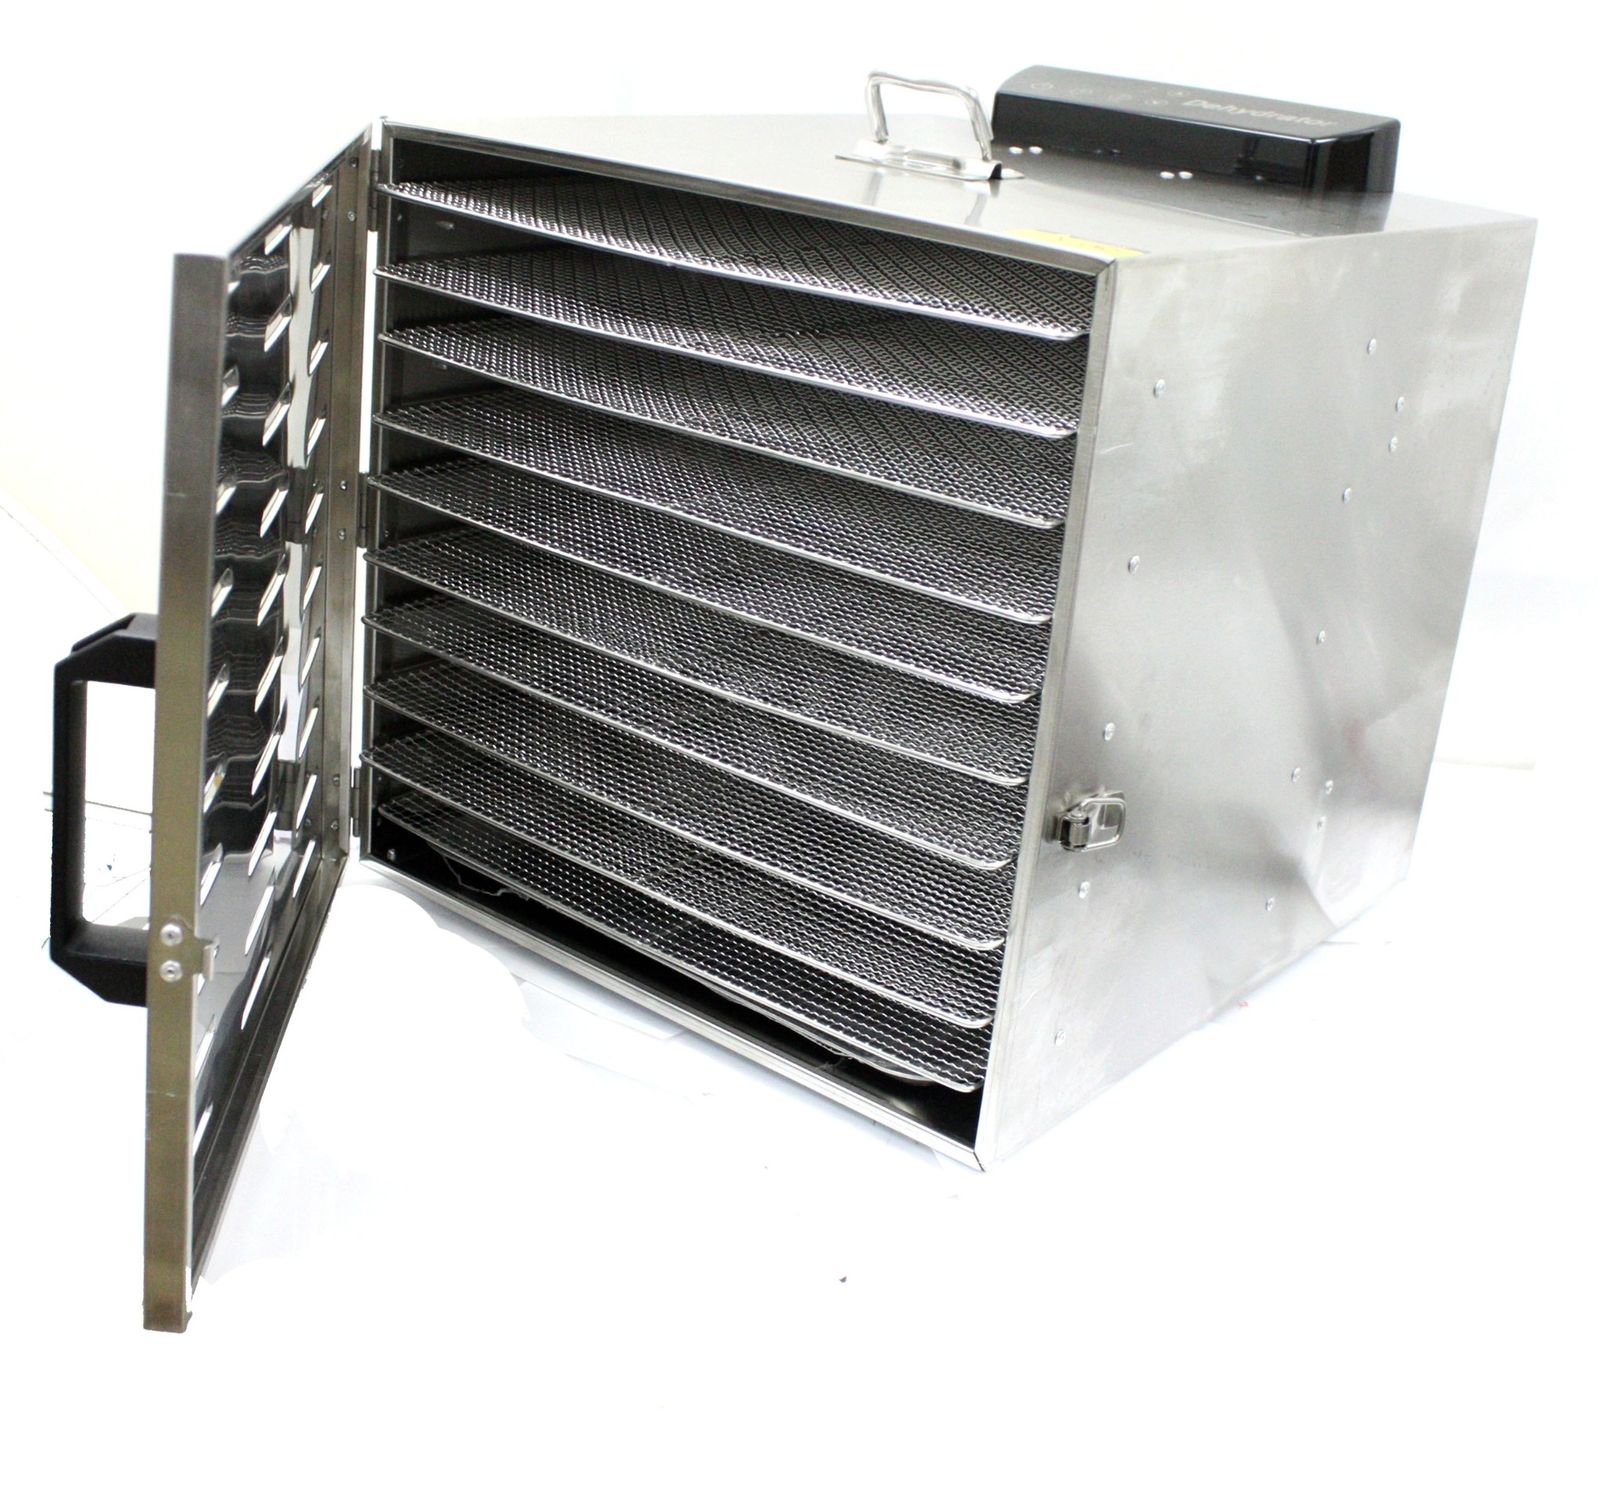 https://econosuperstore.com/wp-content/uploads/imported/8/10-Tray-Food-Dehydrator-Stainless-Fruit-Jerky-Dryer-Blower-Commercial-1000W-202209322468.JPG